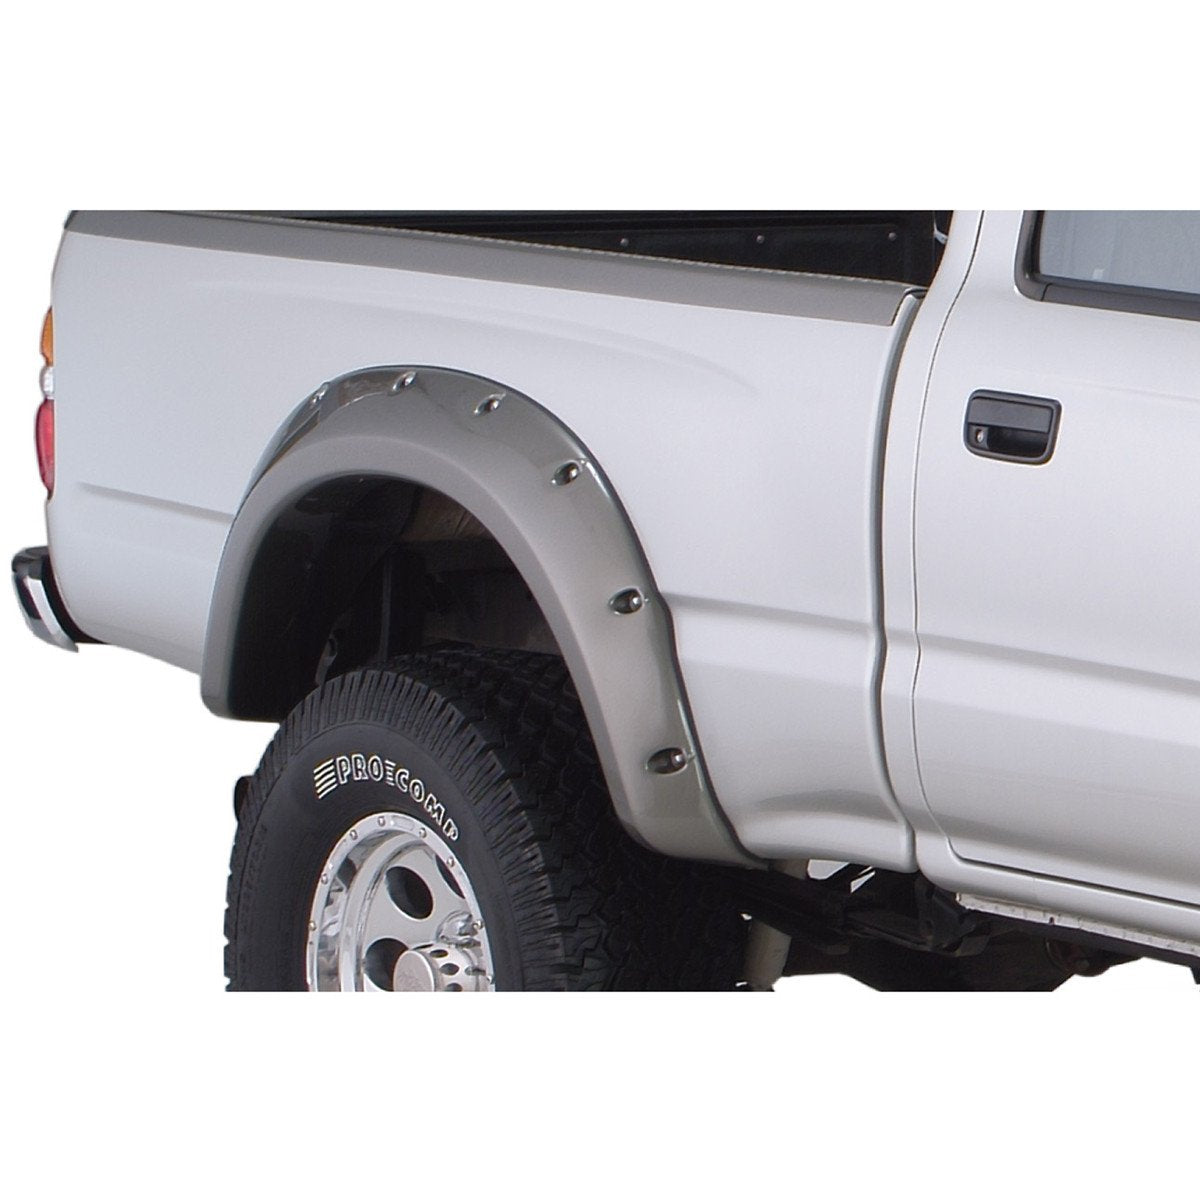 1995 2004 Toyota Tacoma Cut Out Style Fender Flare Frontrear Kit